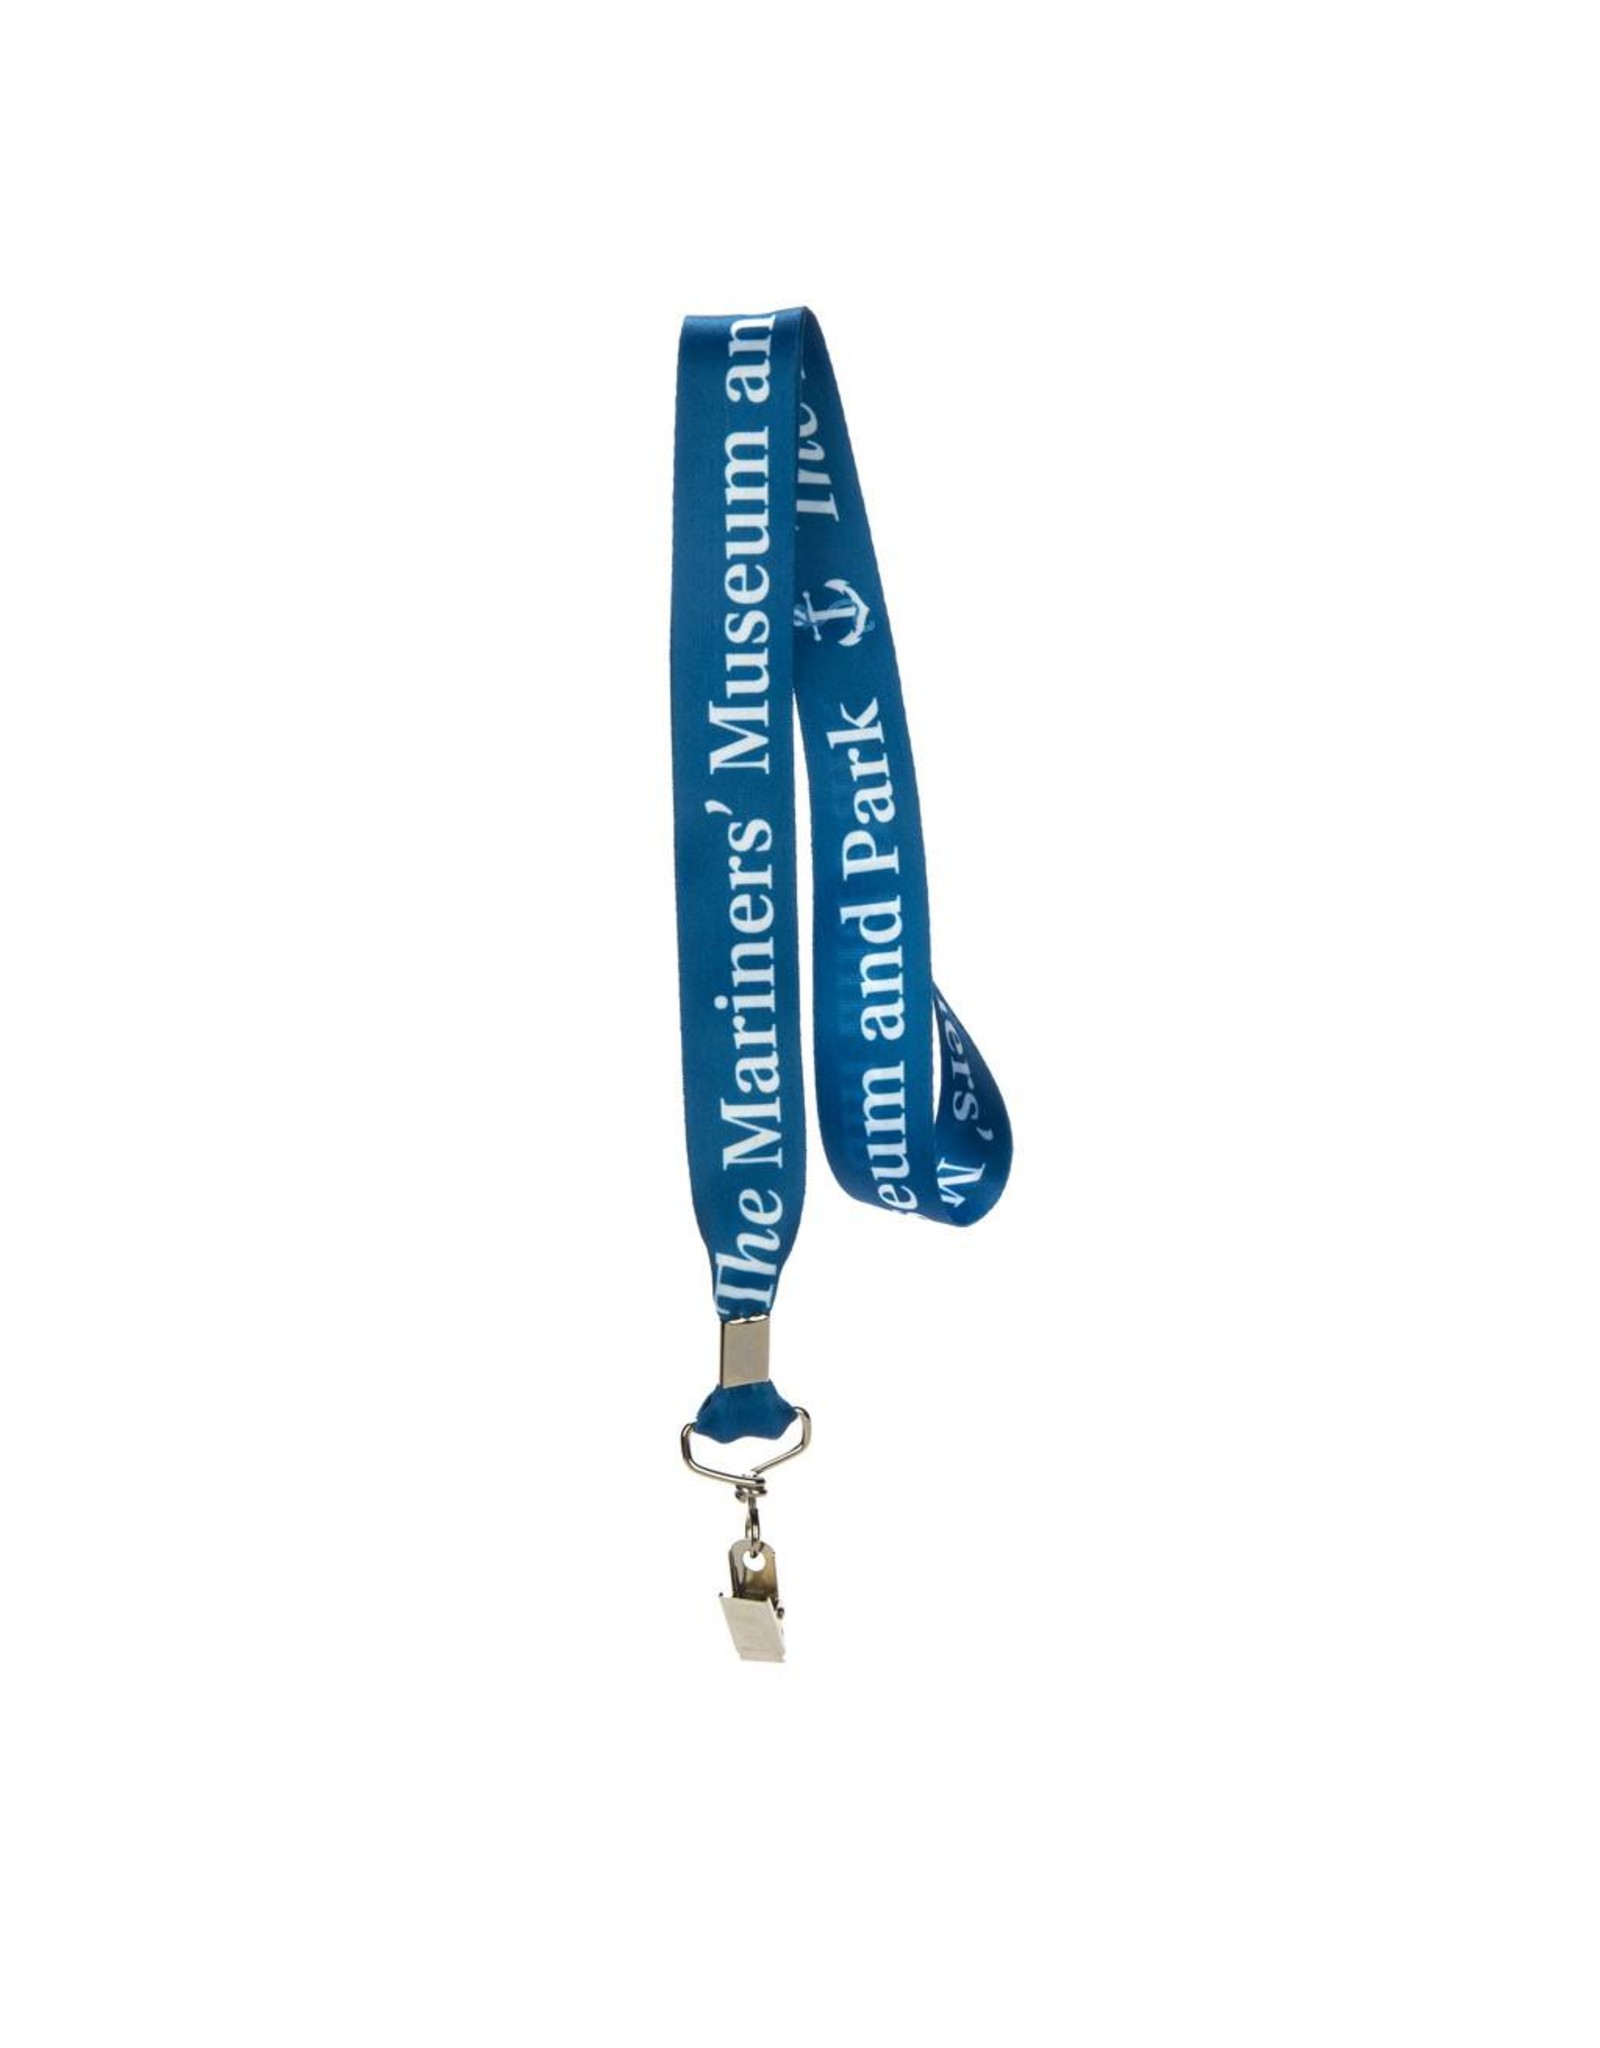 The Mariners' Museum and Park Lanyard